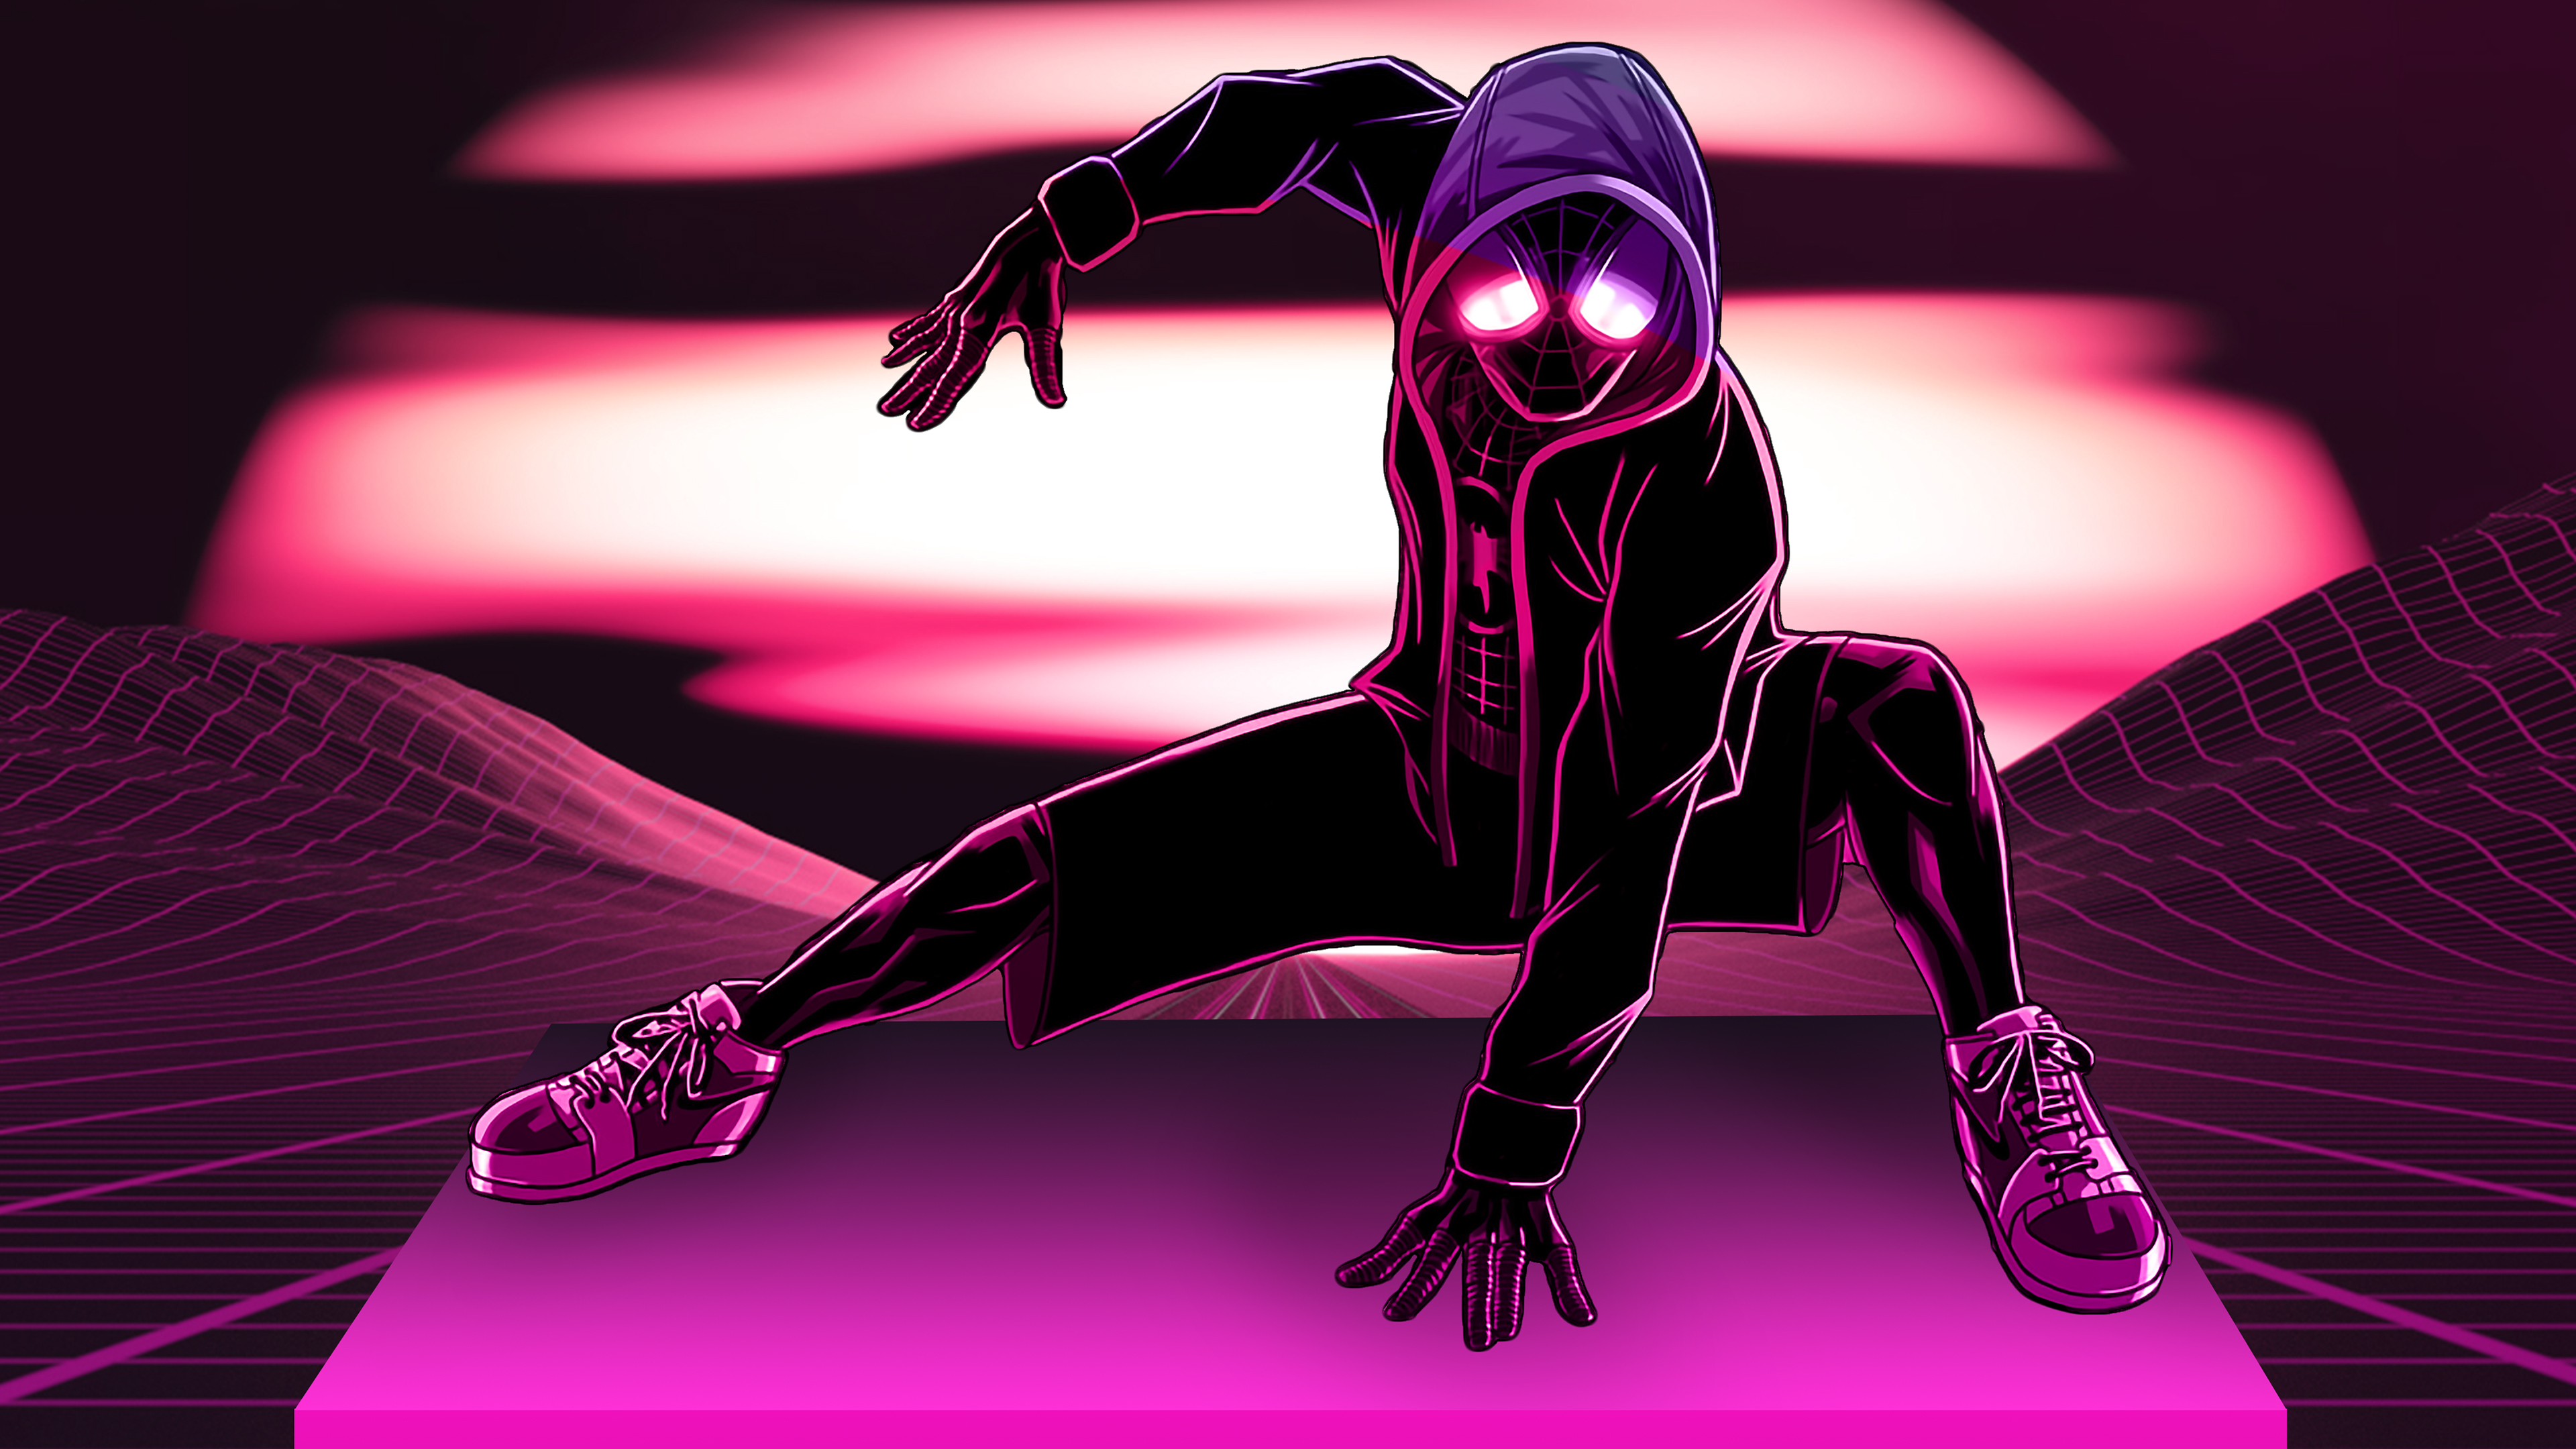  Spider Man  Into  The Spider  Verse  Backgrounds  Pictures 